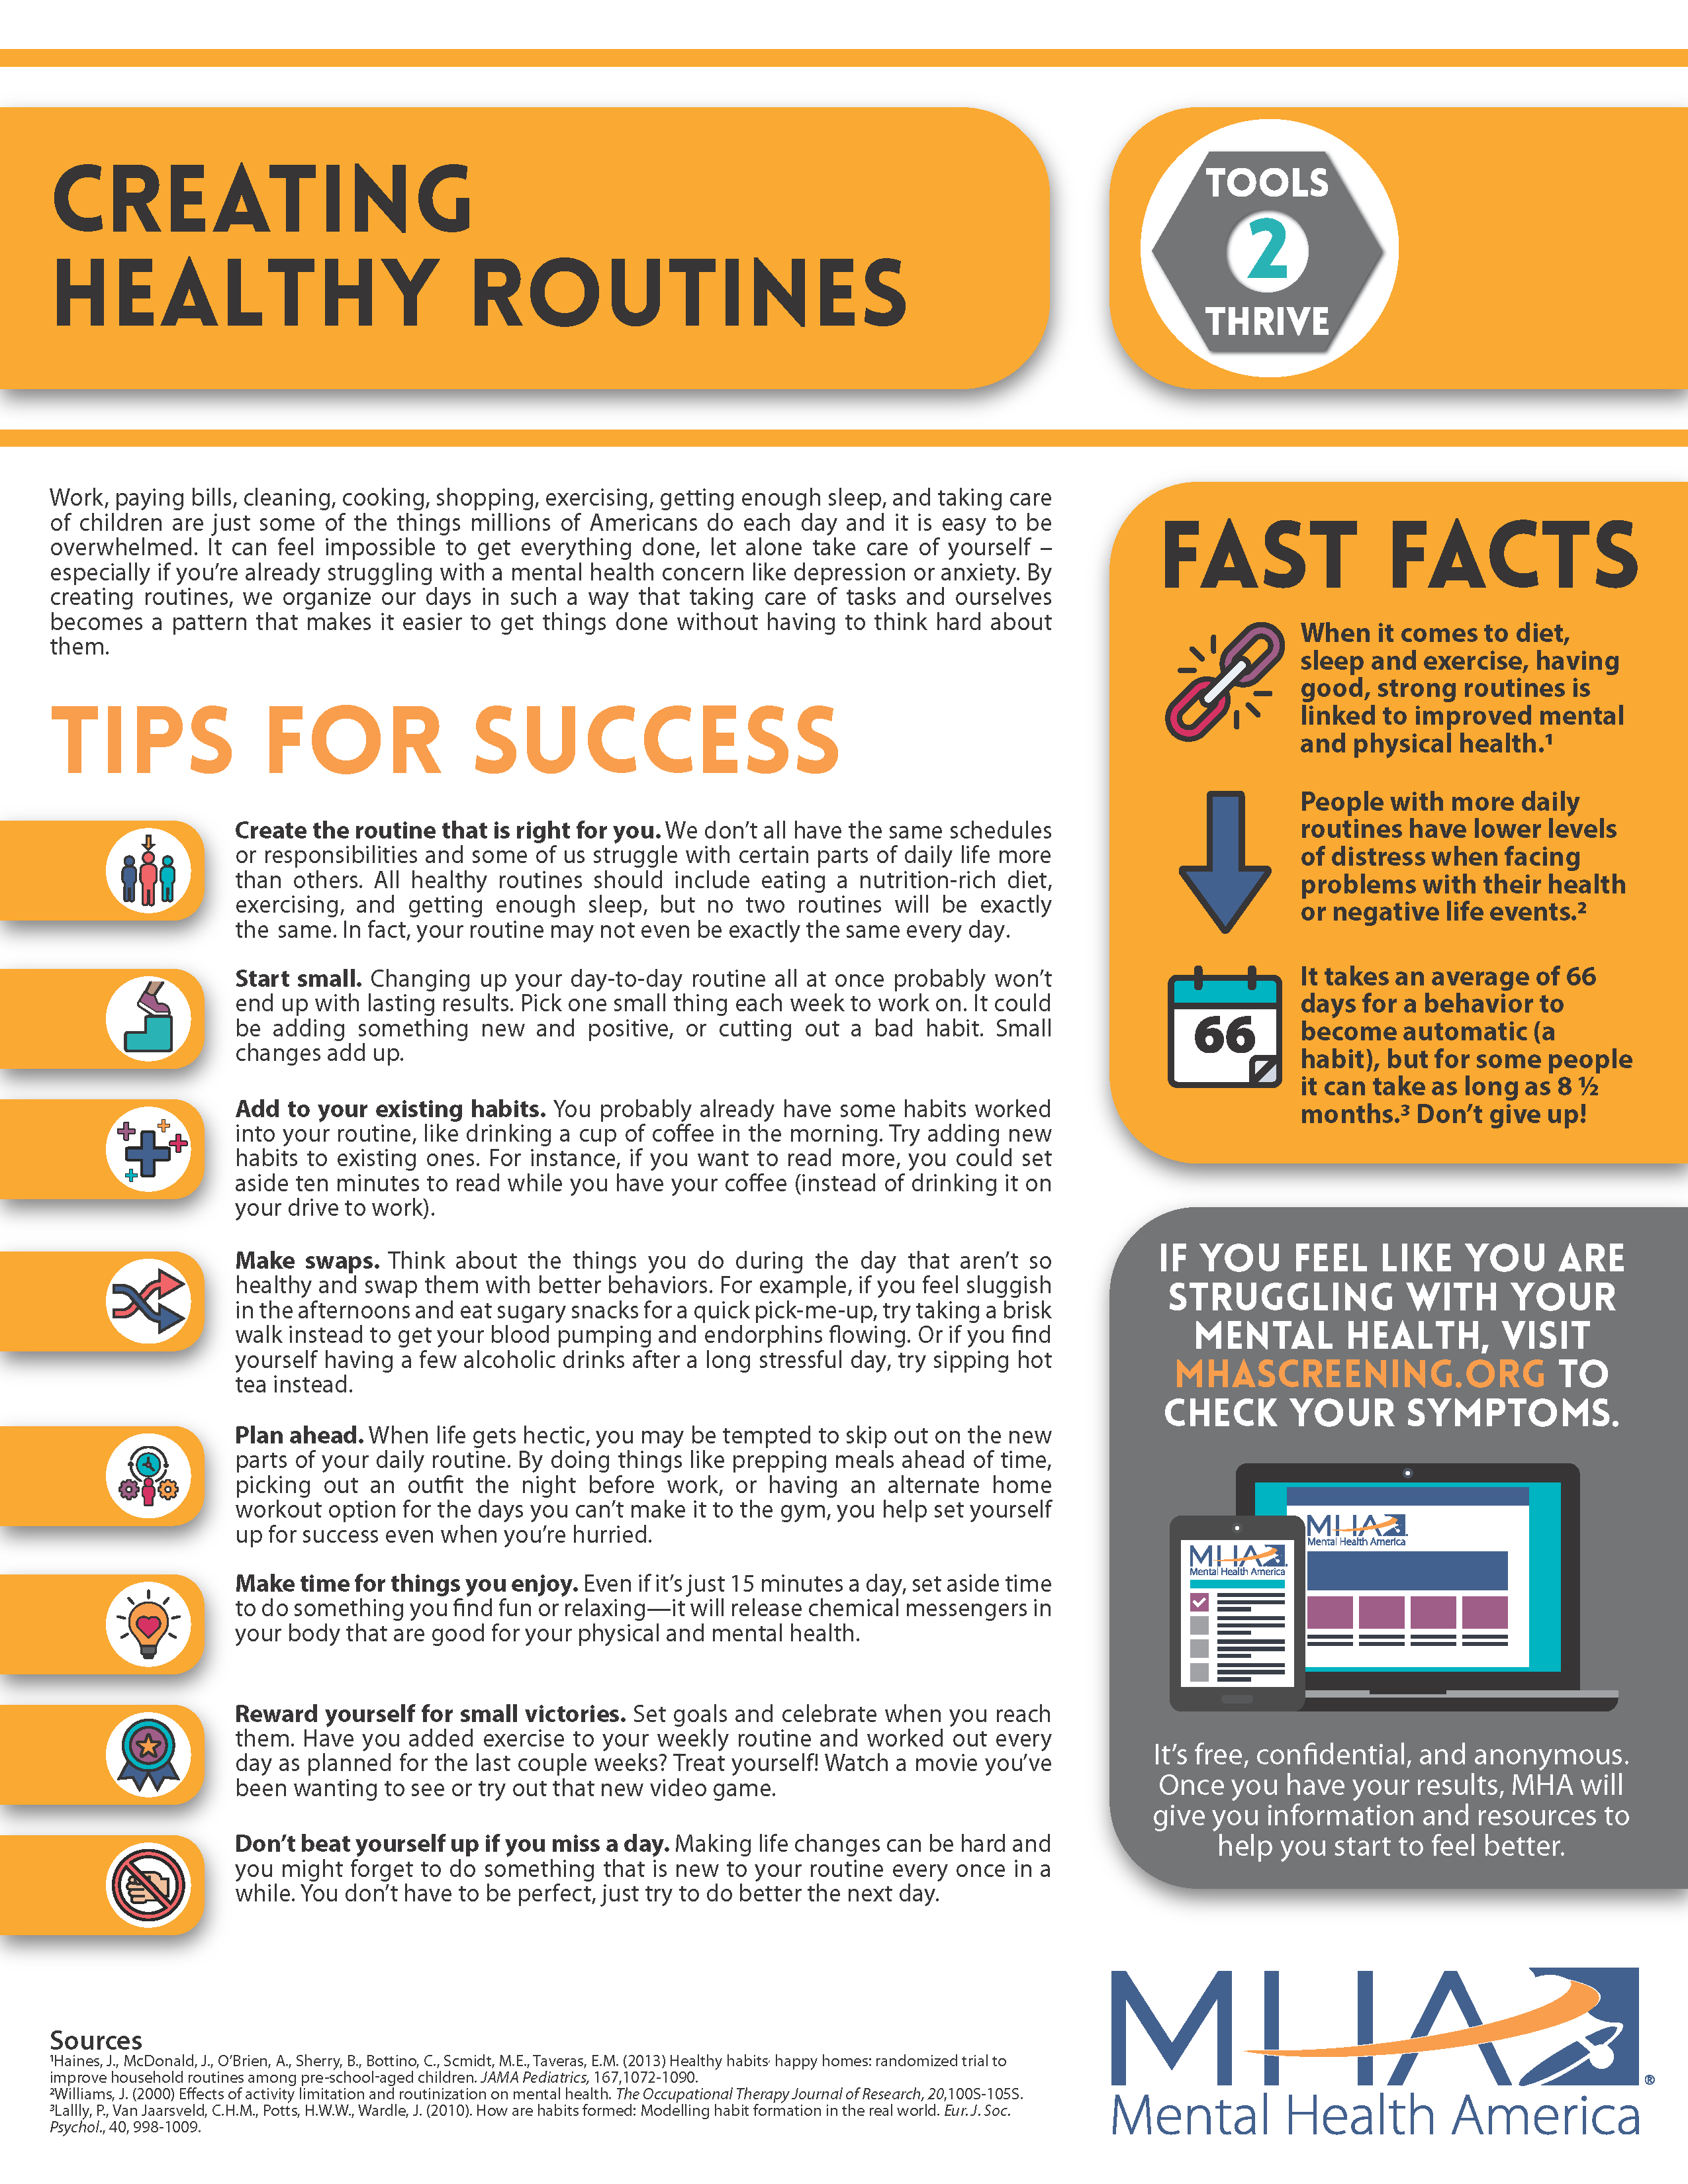 Creating healthy routines for mental health